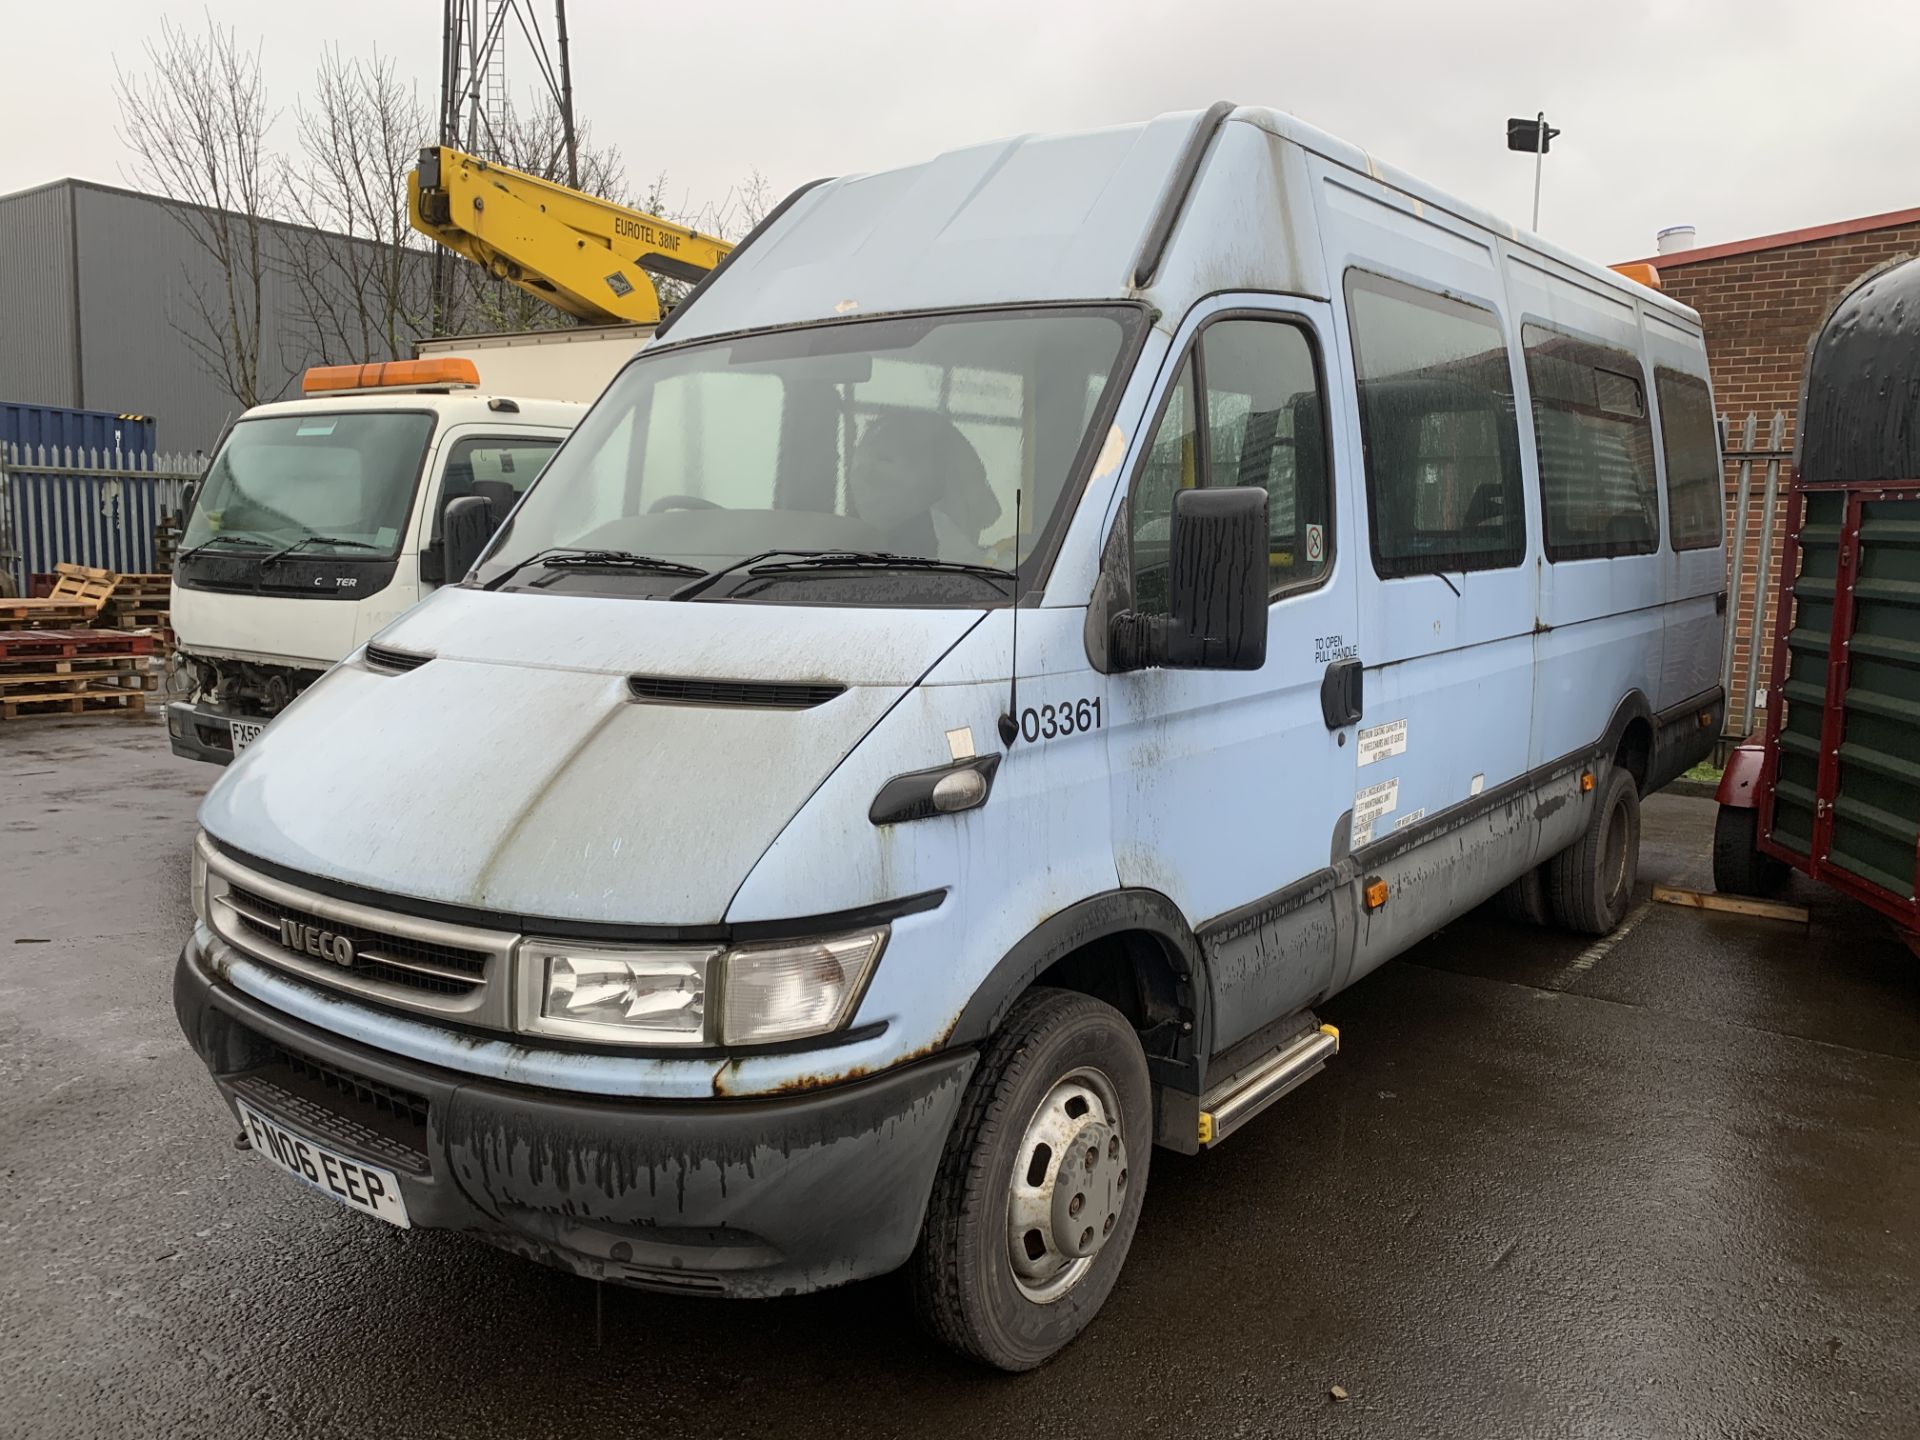 Iveco Daily 3.0 HPi LWB Minibus - Image 3 of 12